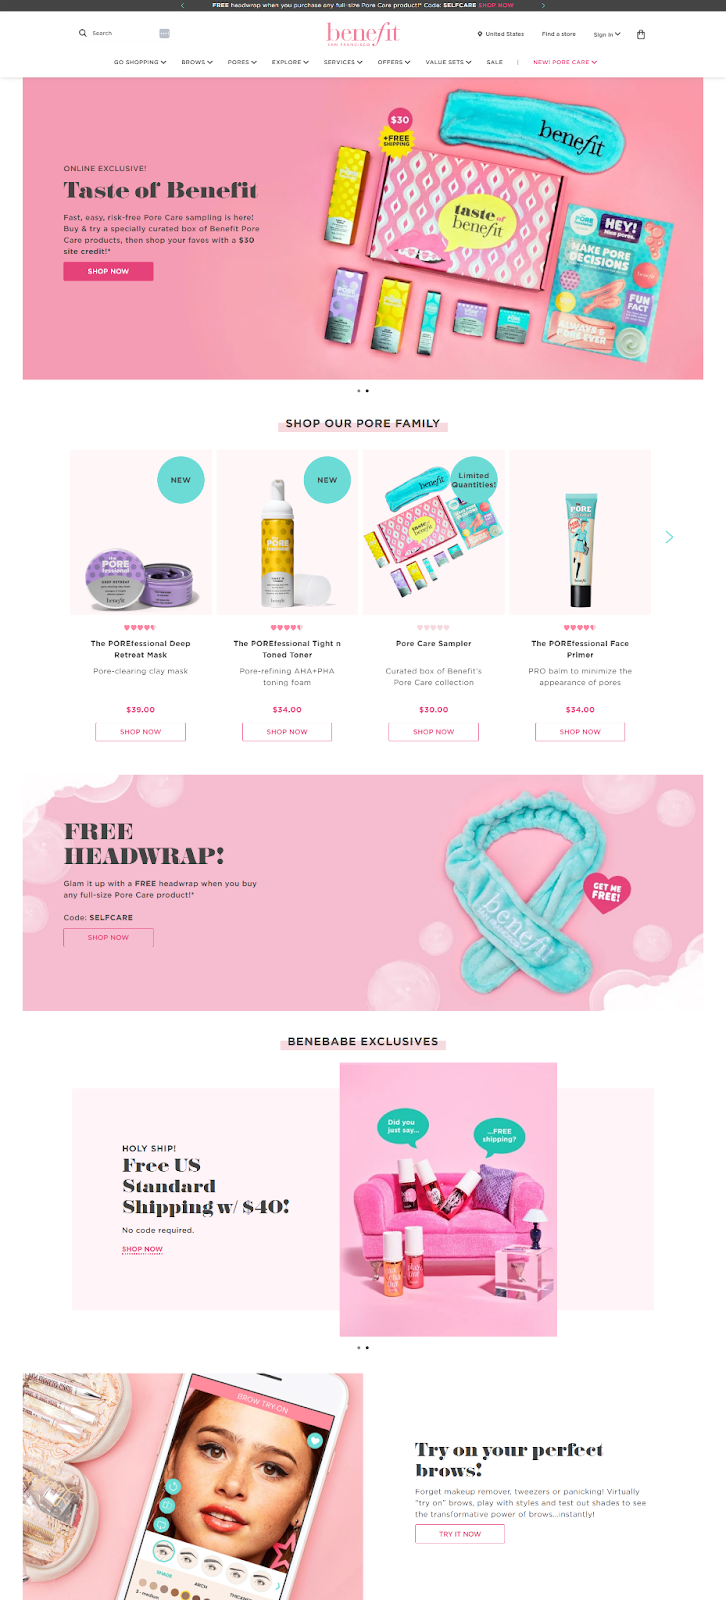 Benefit Cosmetics' homepage screenshot shows how a pink color scheme is used throughout their pink website.